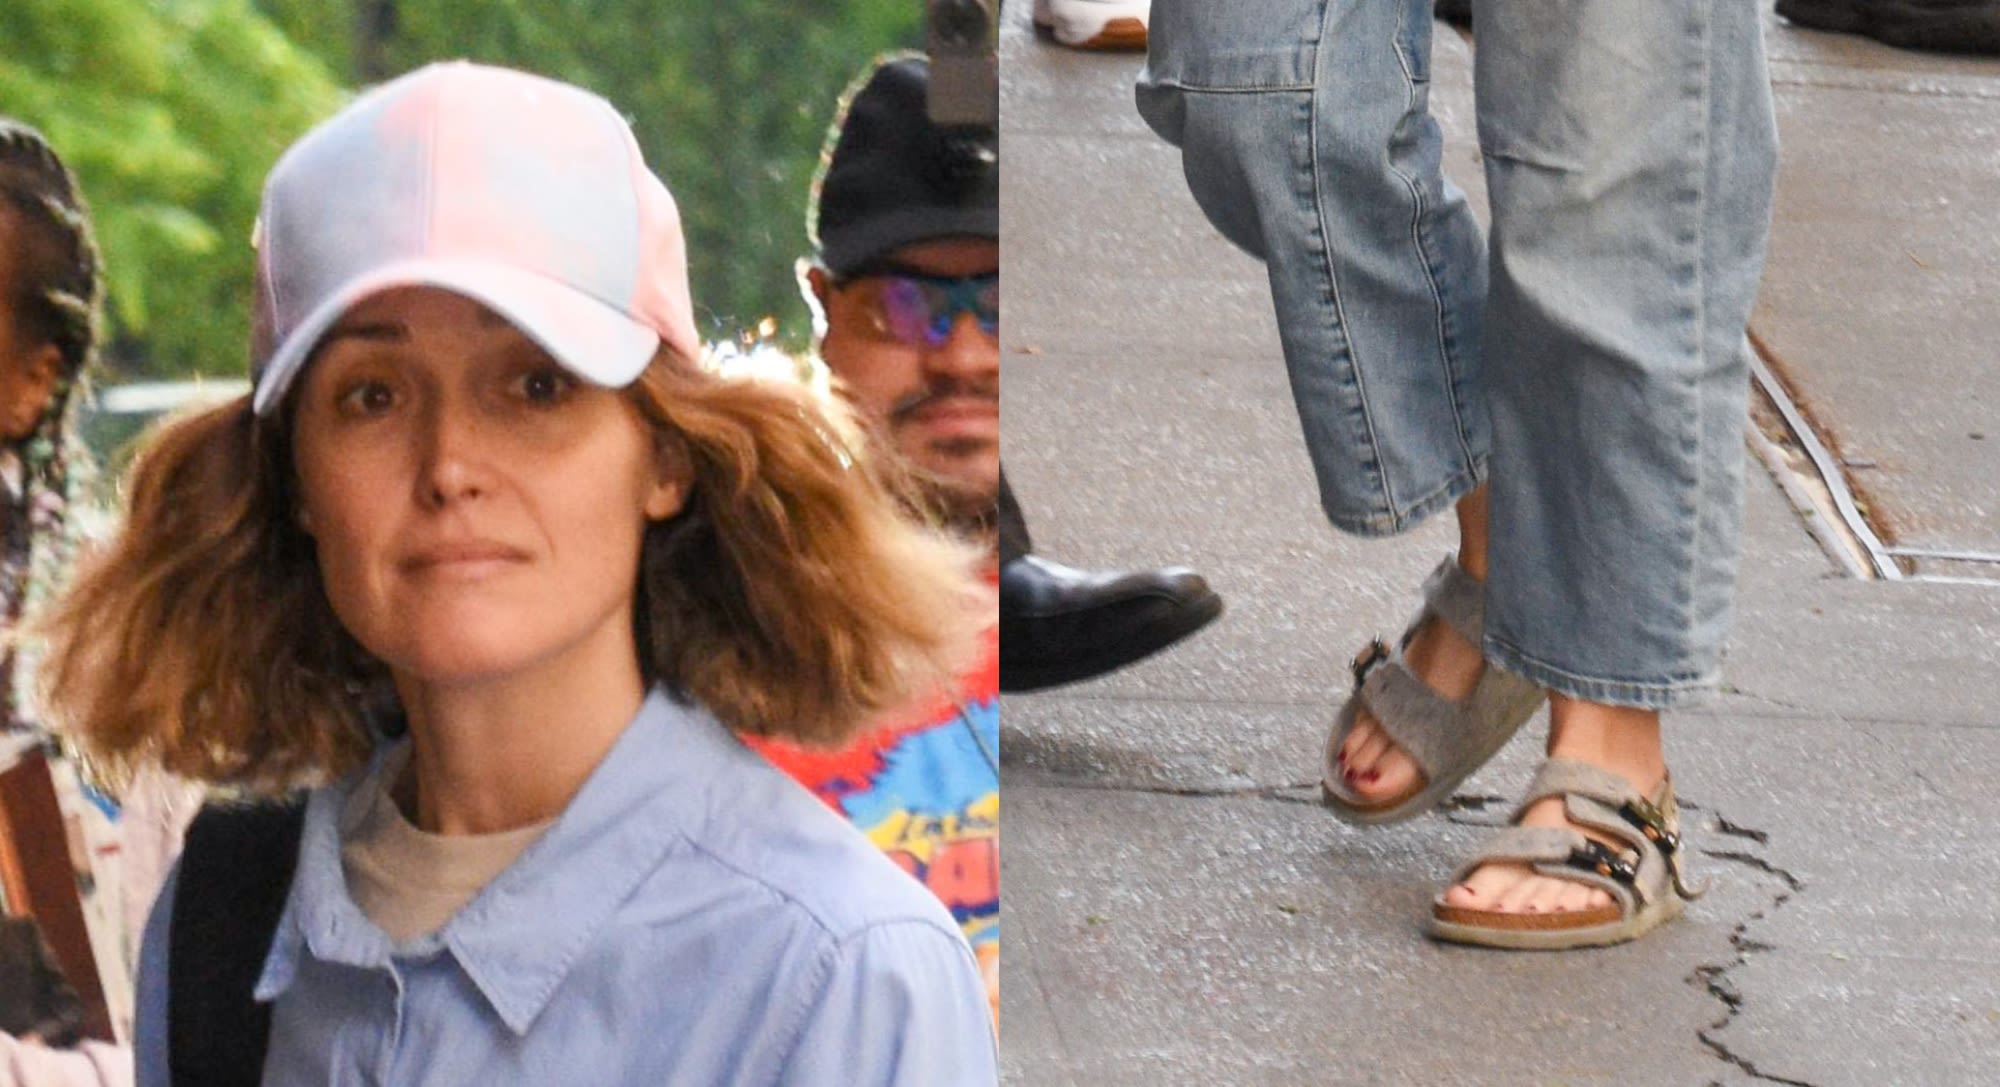 Rose Byrne Goes Relaxed in Grey Dior for Birkenstock Sandals for ‘The View’